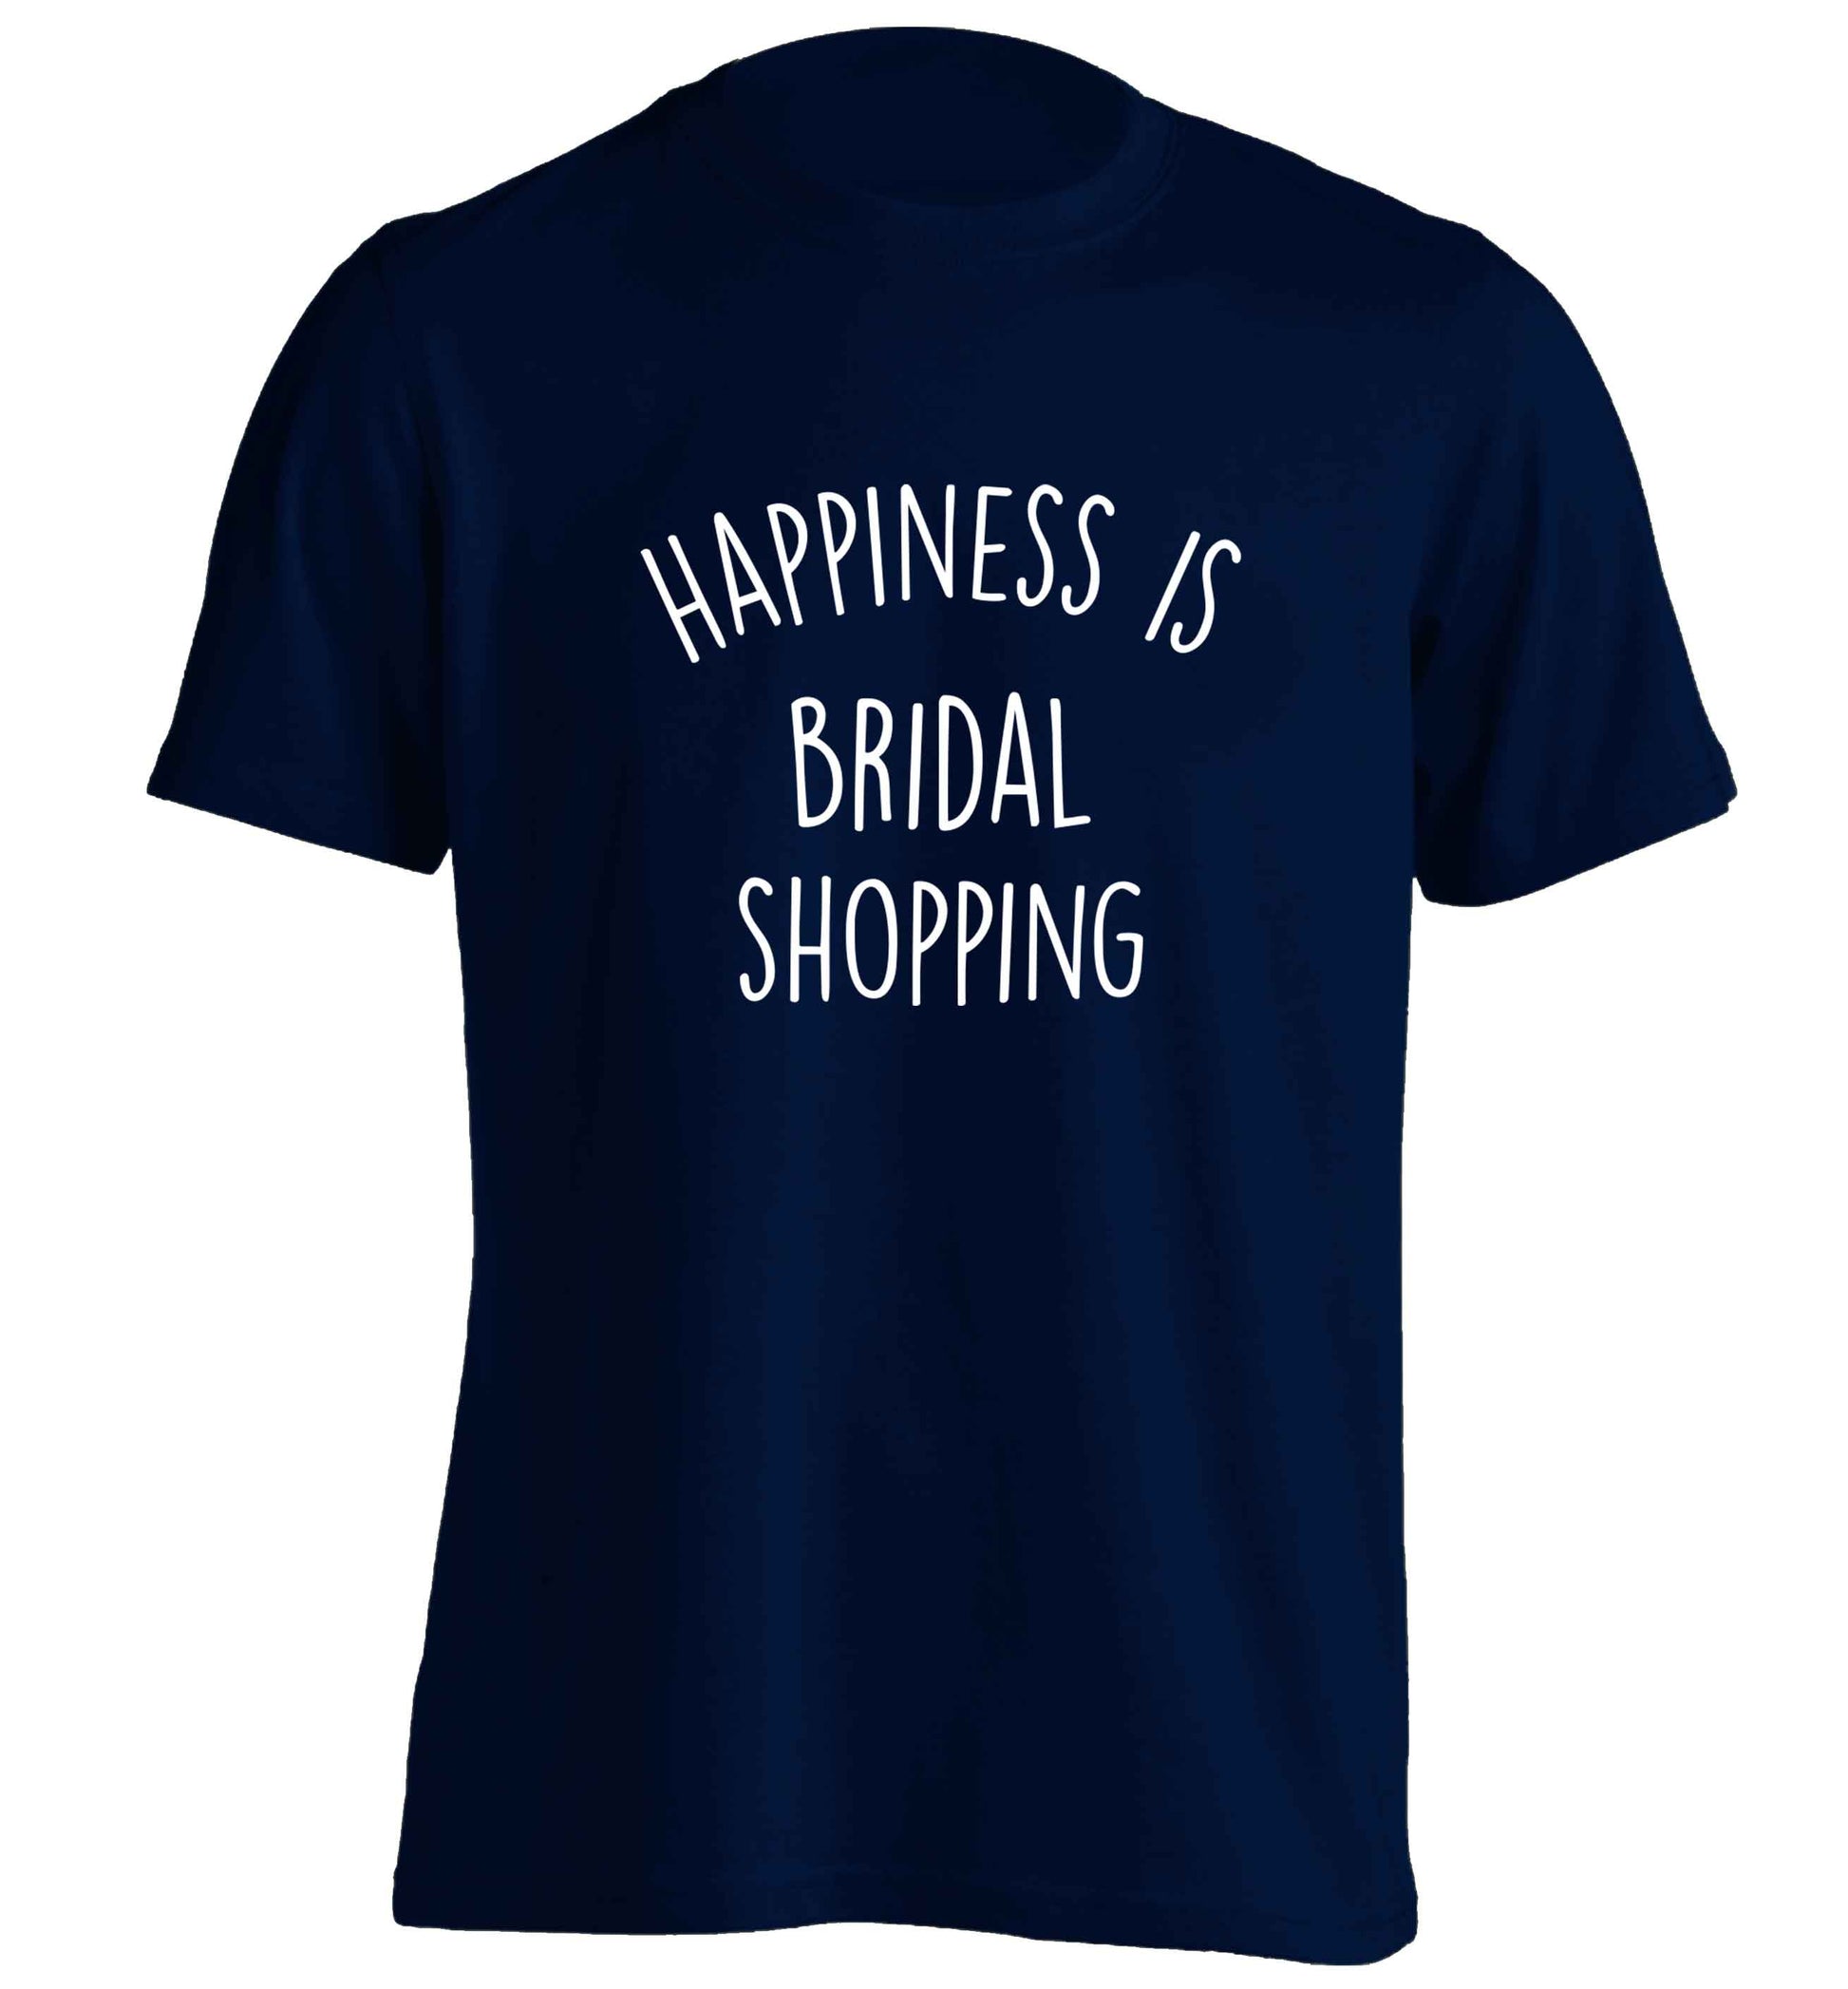 Happiness is bridal shopping adults unisex navy Tshirt 2XL